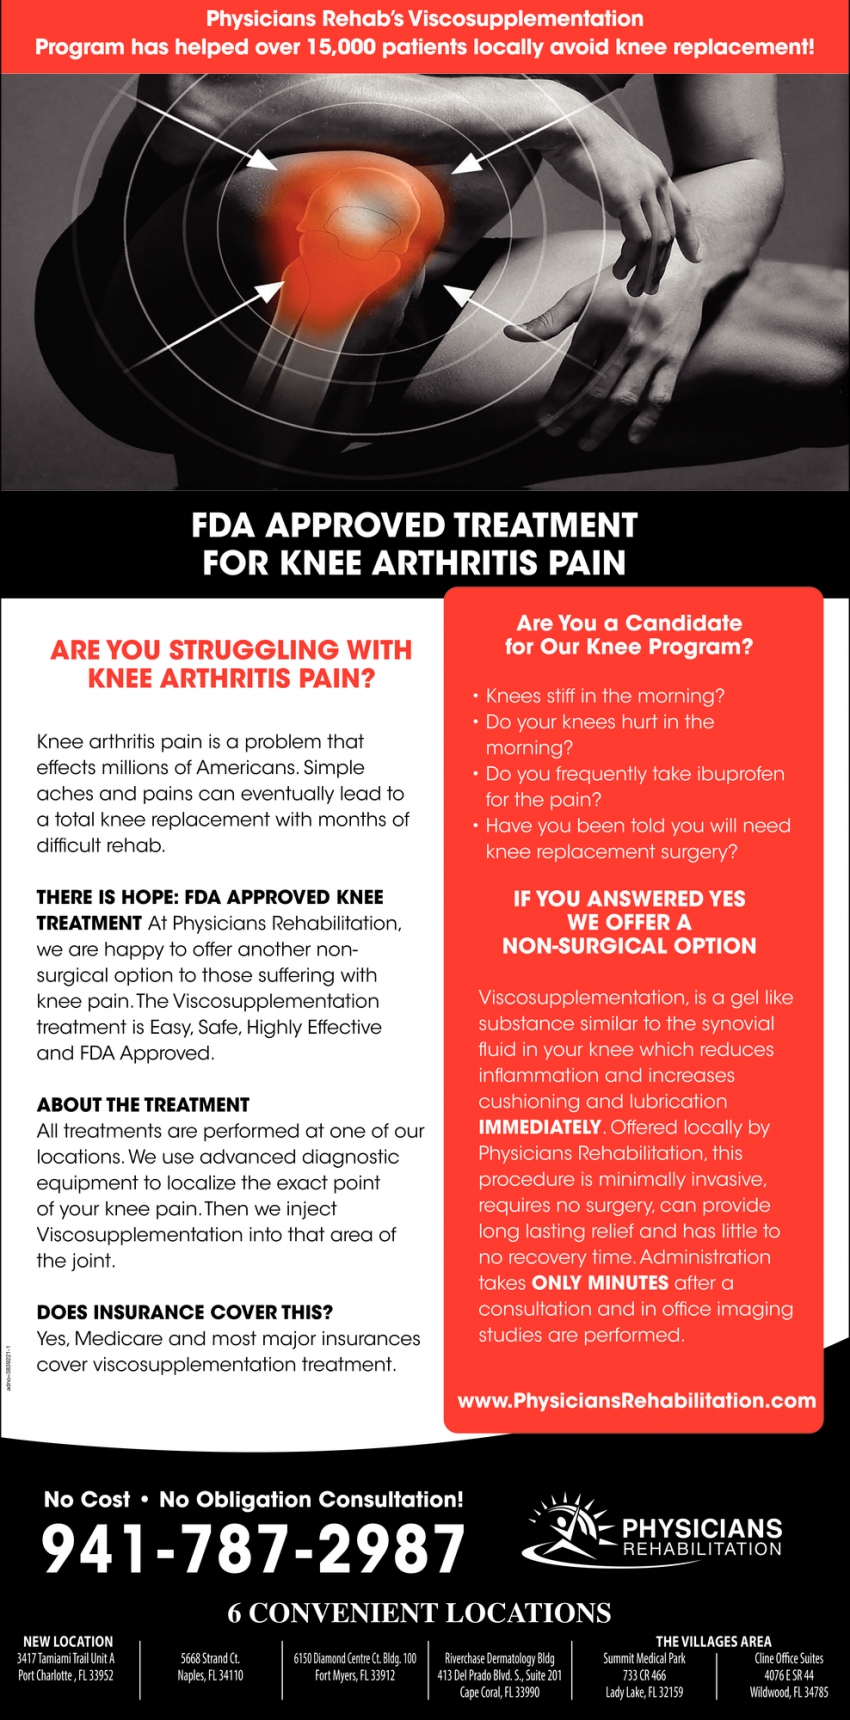 FDA Approved Treatment for Knee Arthritis Pain